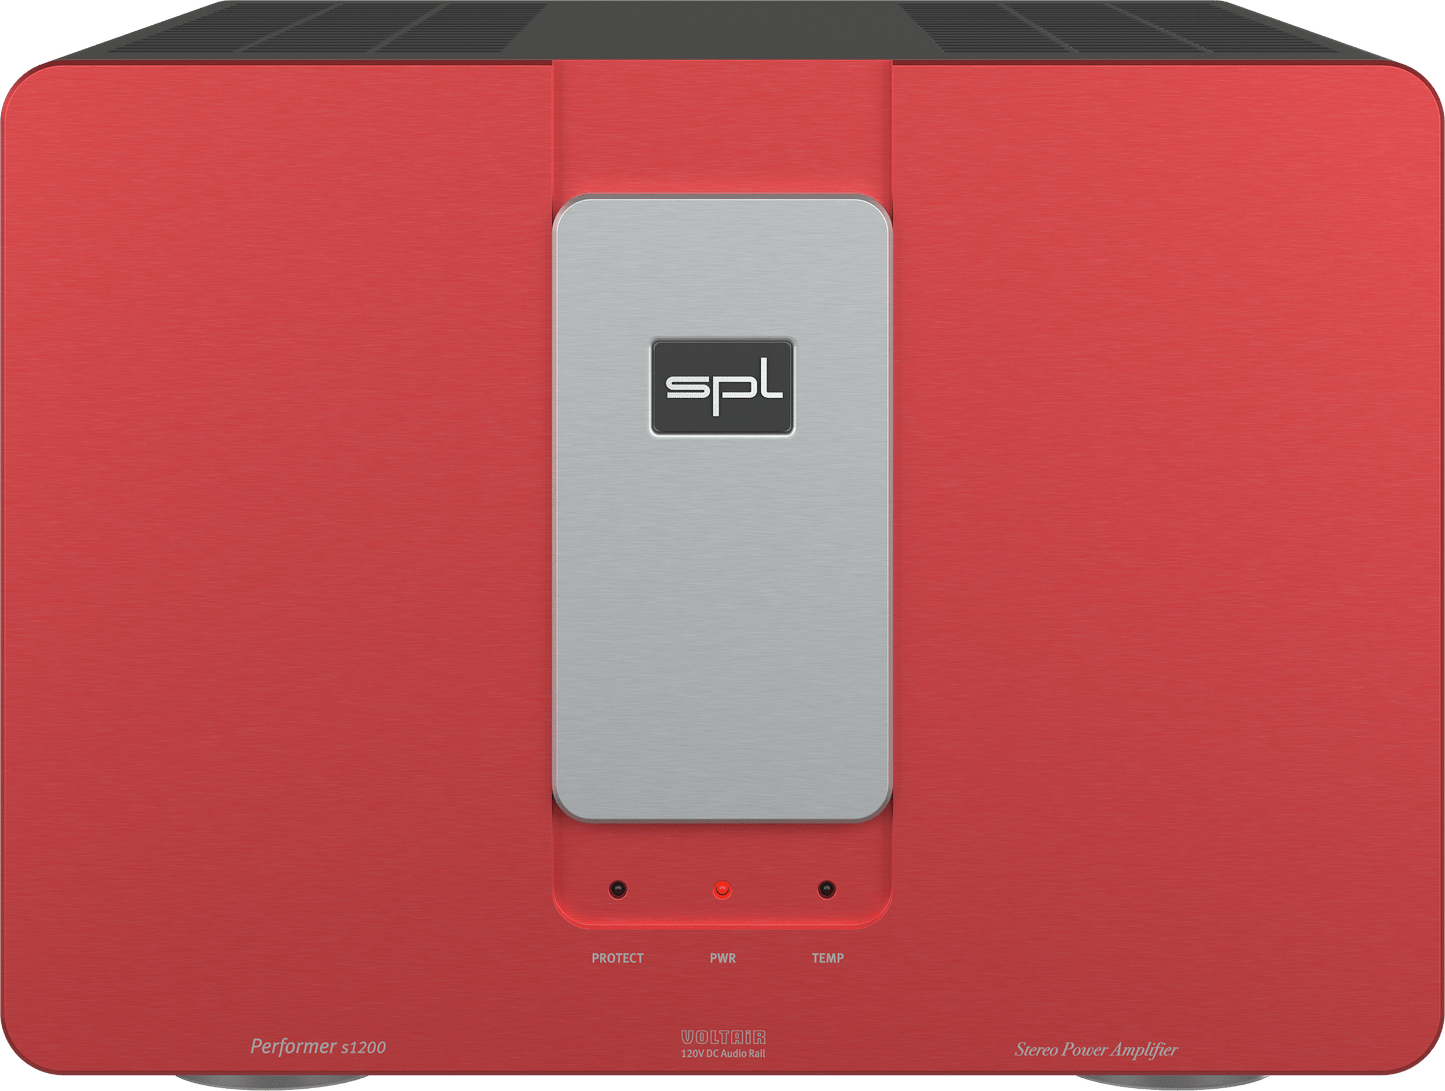 SPL Audio Performer s1200 Stereo Power Amplifier in red with silver insert